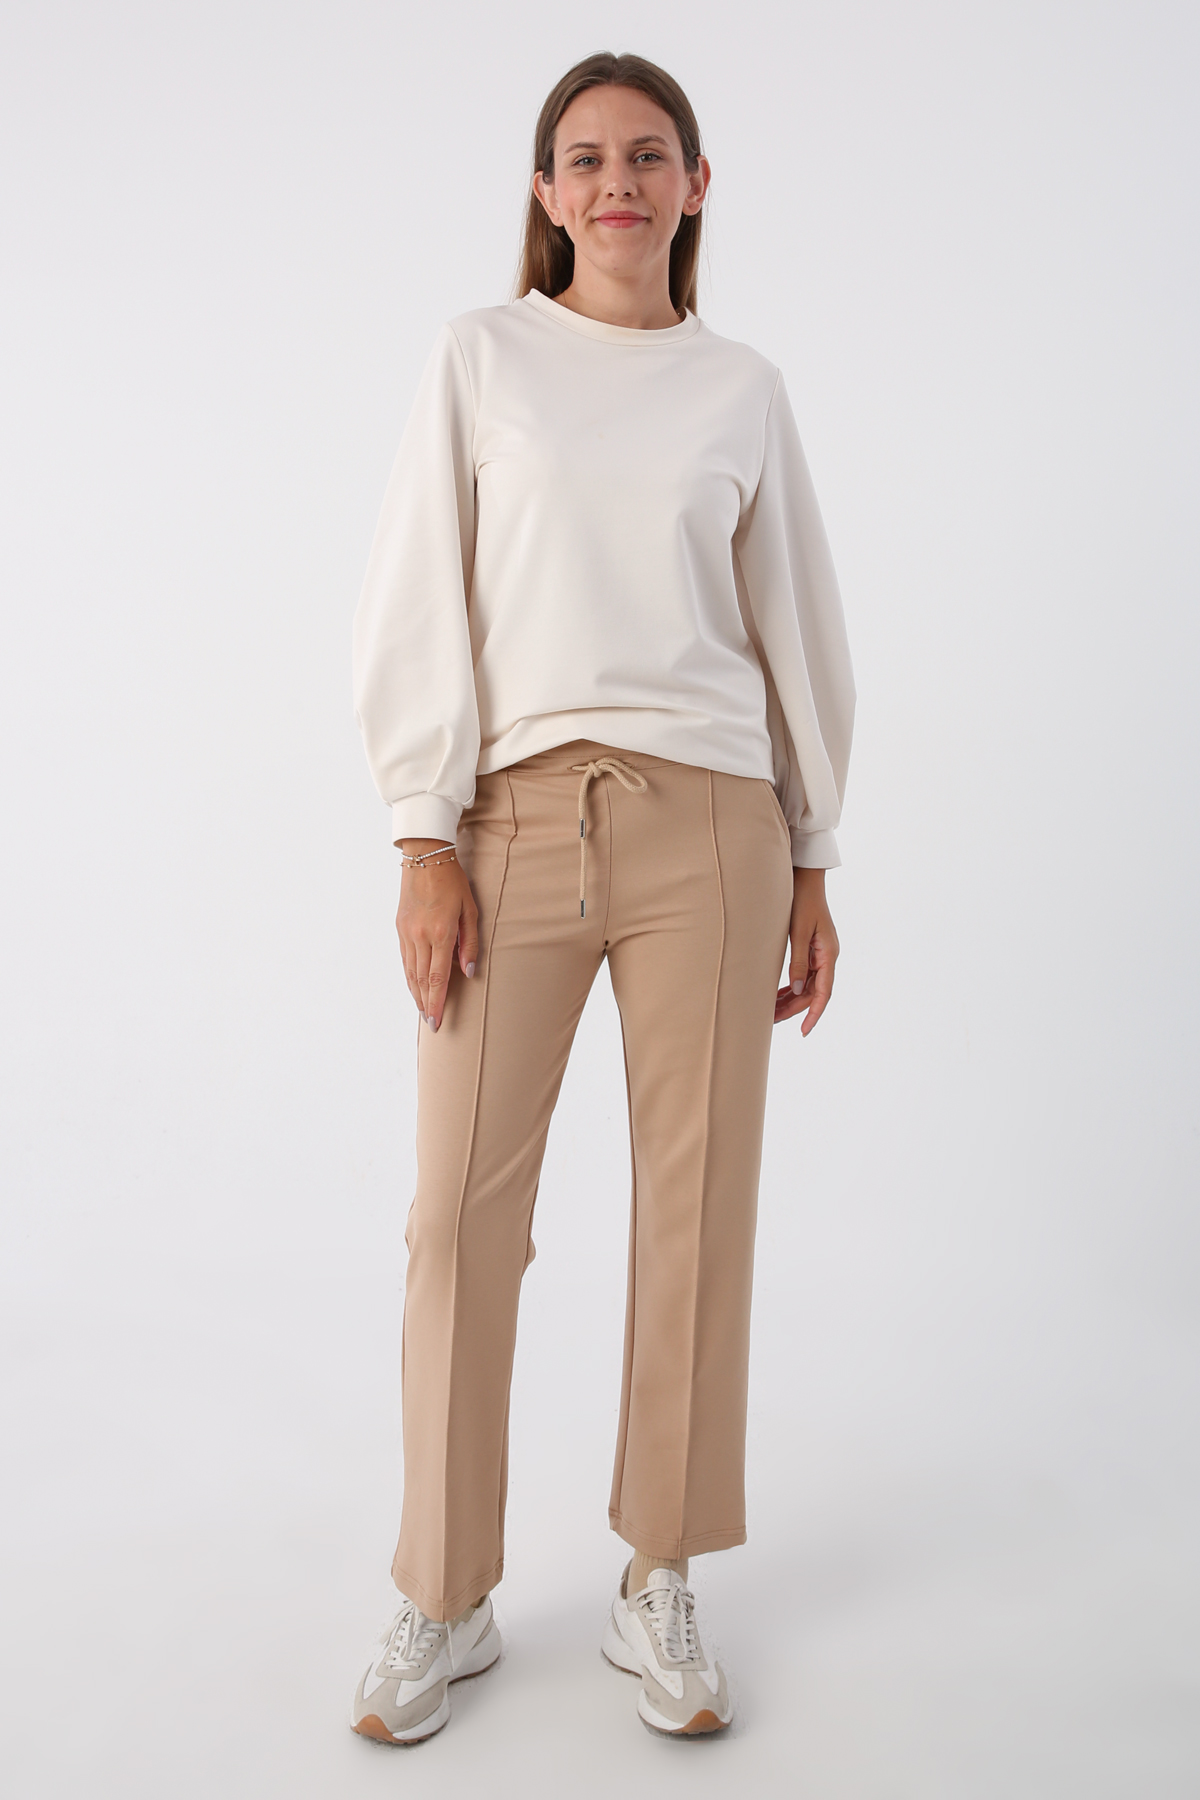 A model wears all11675-pocket-sweatpants-beige, wholesale Sweatpants of Allday to display at Lonca